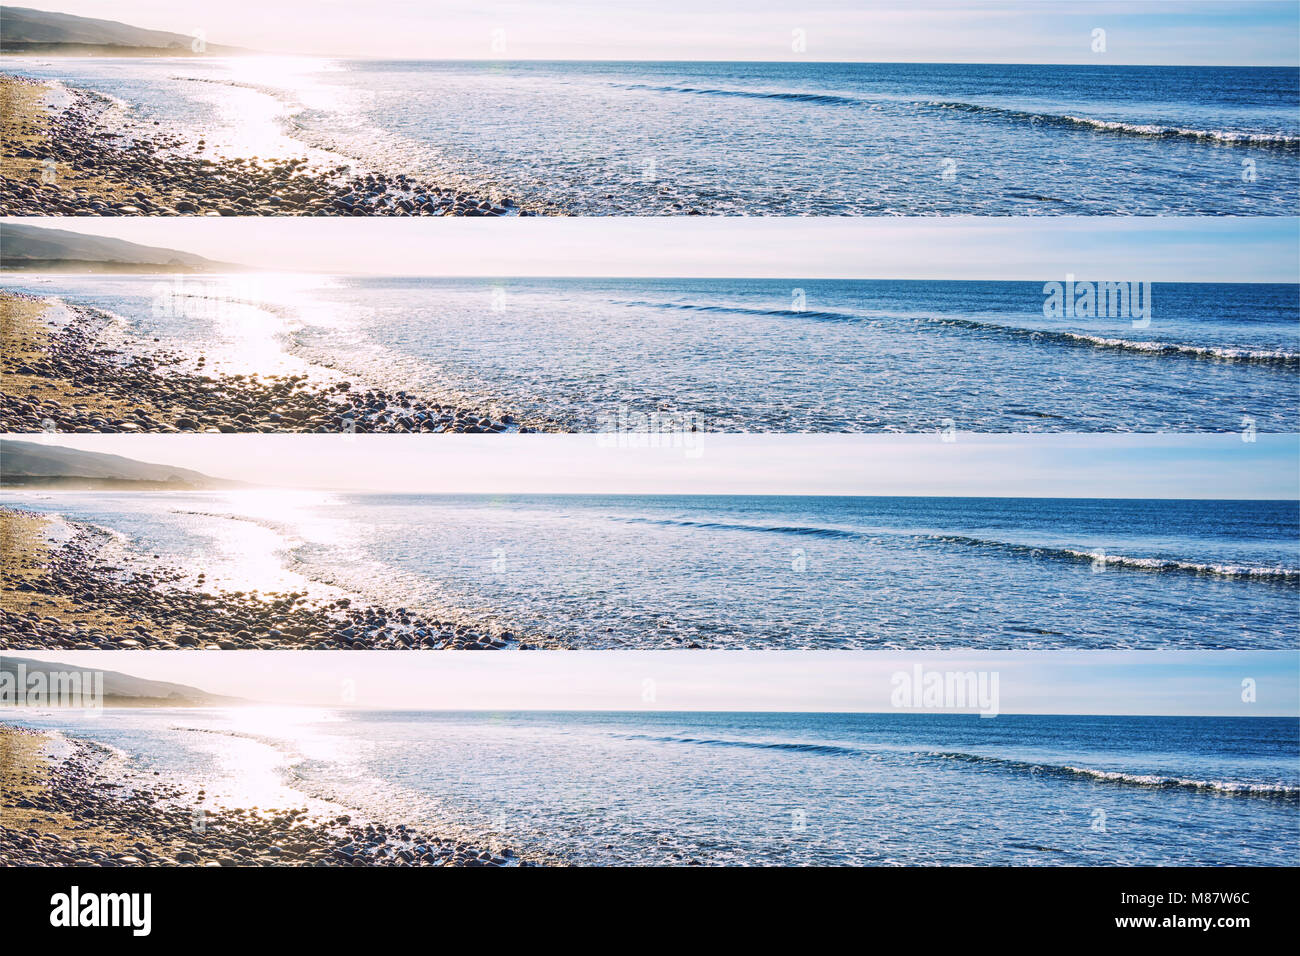 Photo Collage. View of San Onofre State Beach, San Clemente, California. Stock Photo